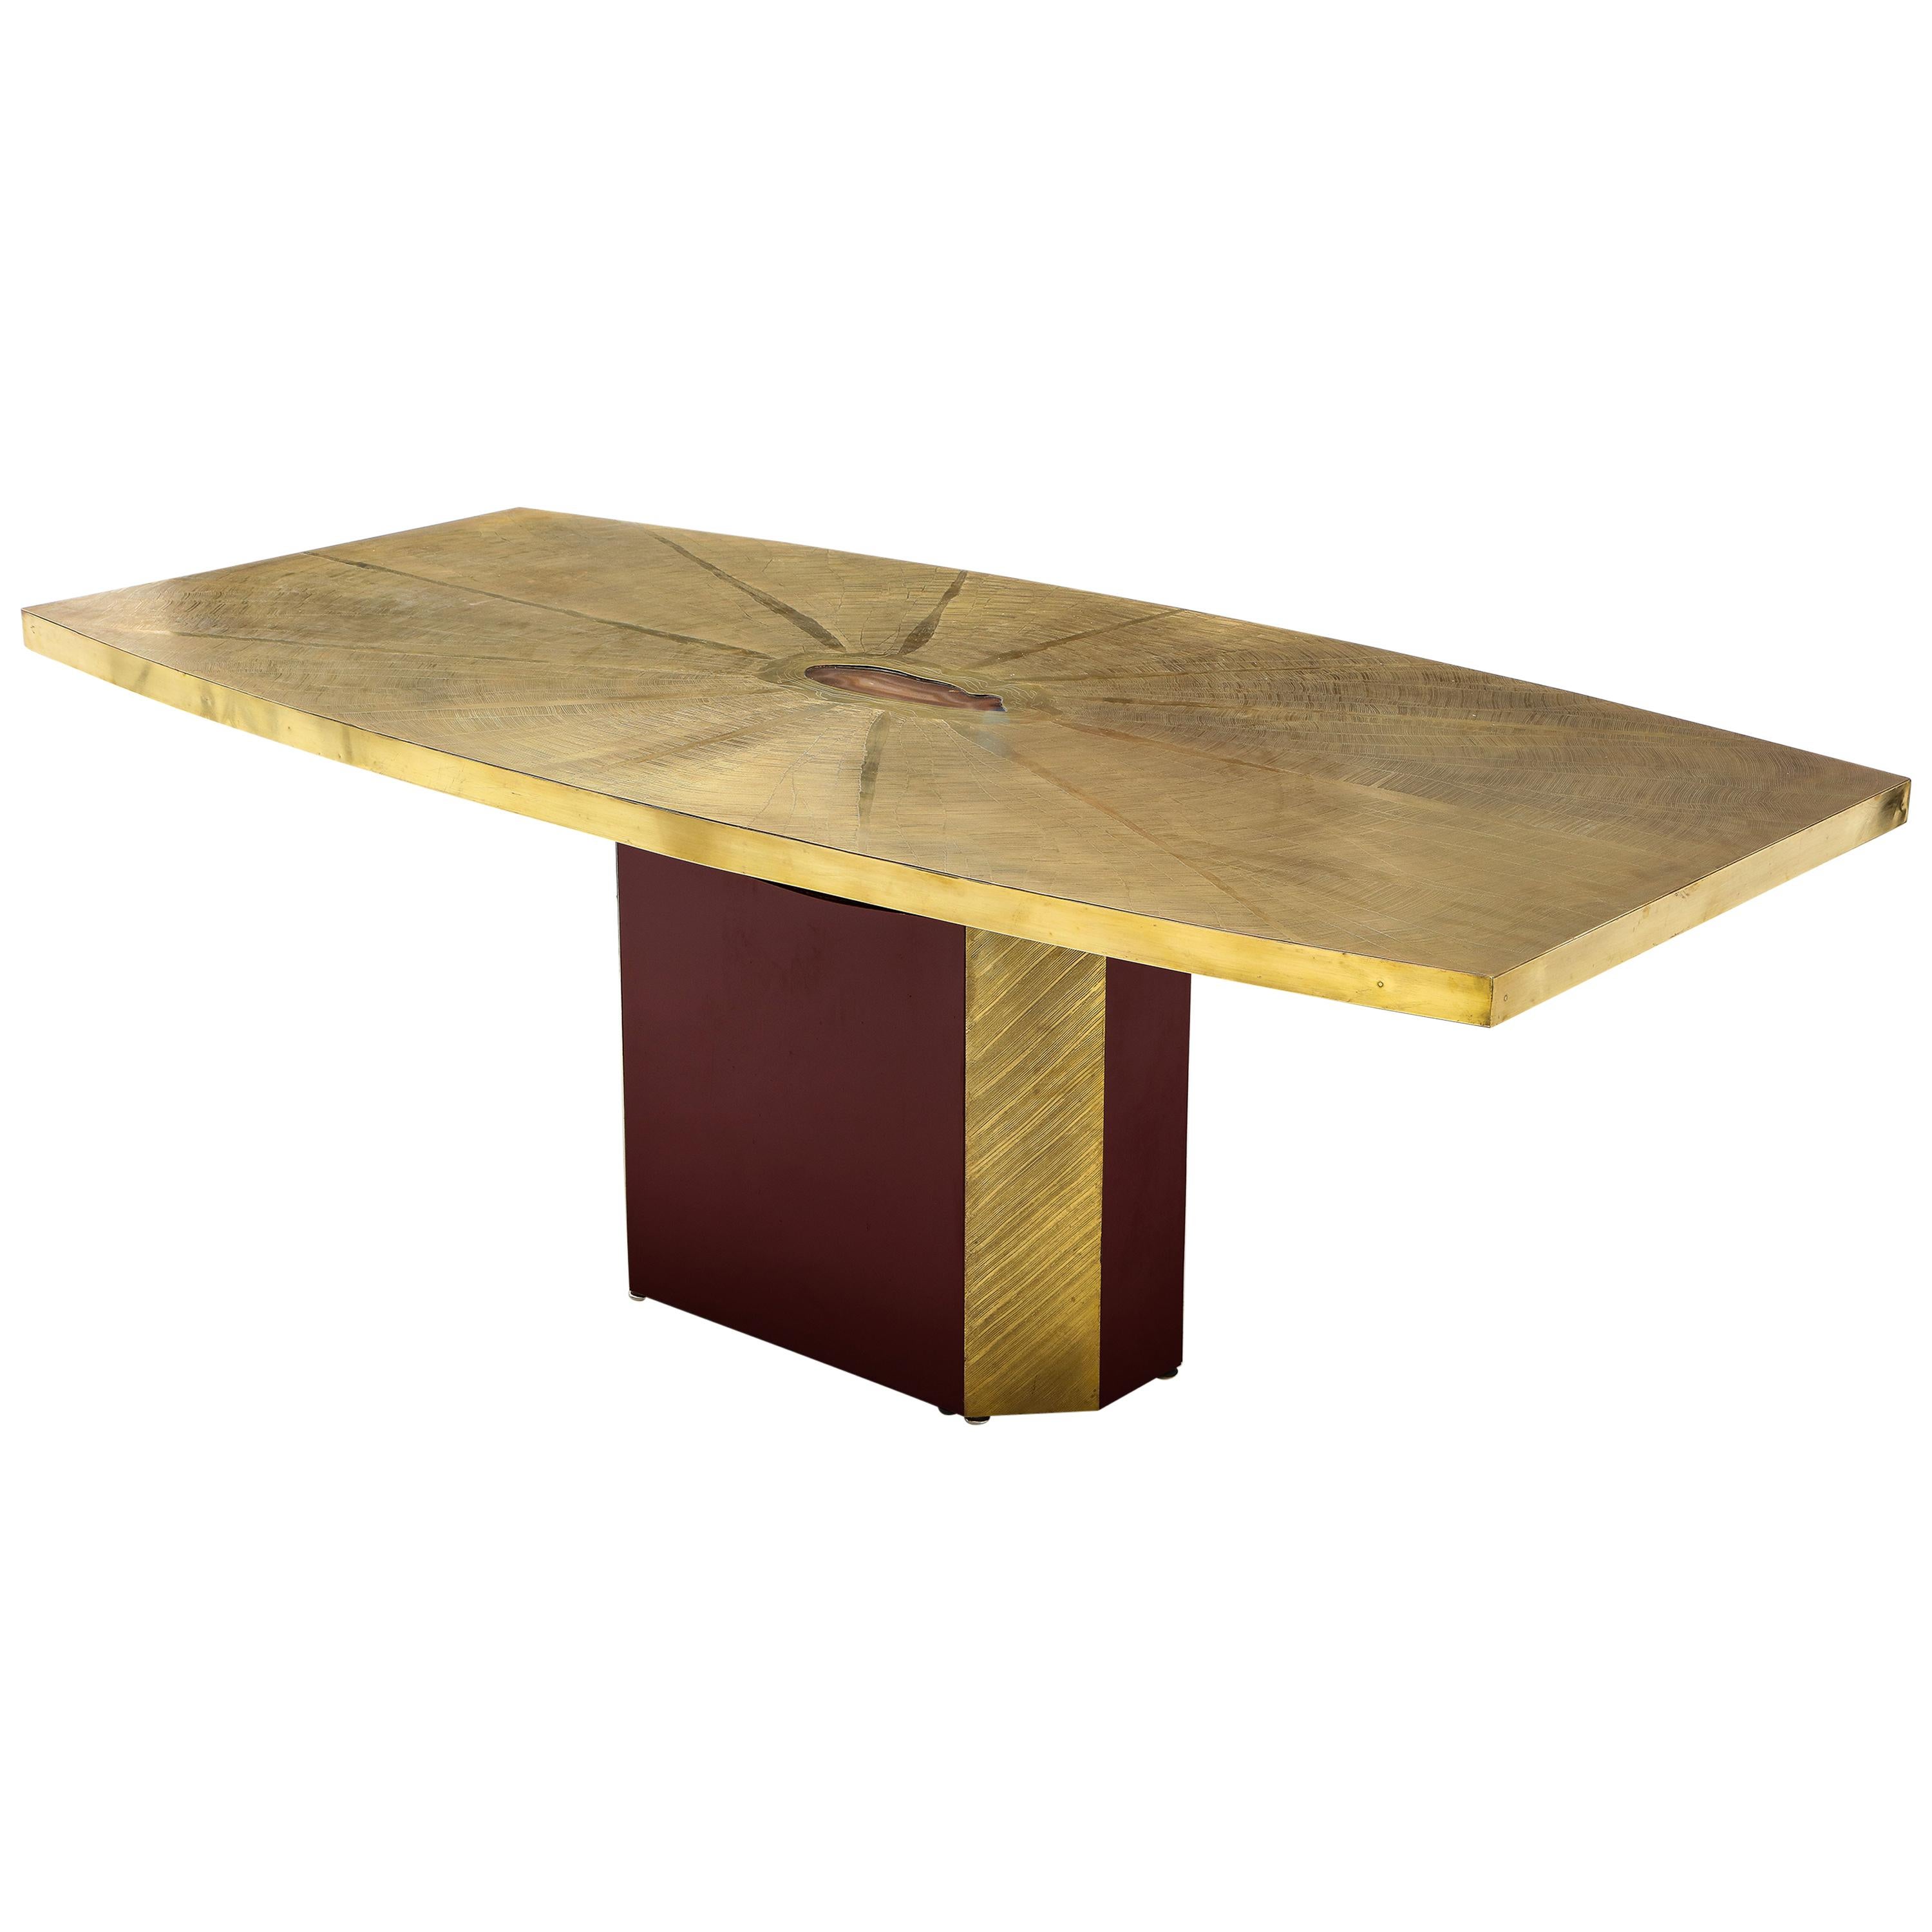 Rare and Important Acid Etched Brass Dining Table by Paco Rabanne